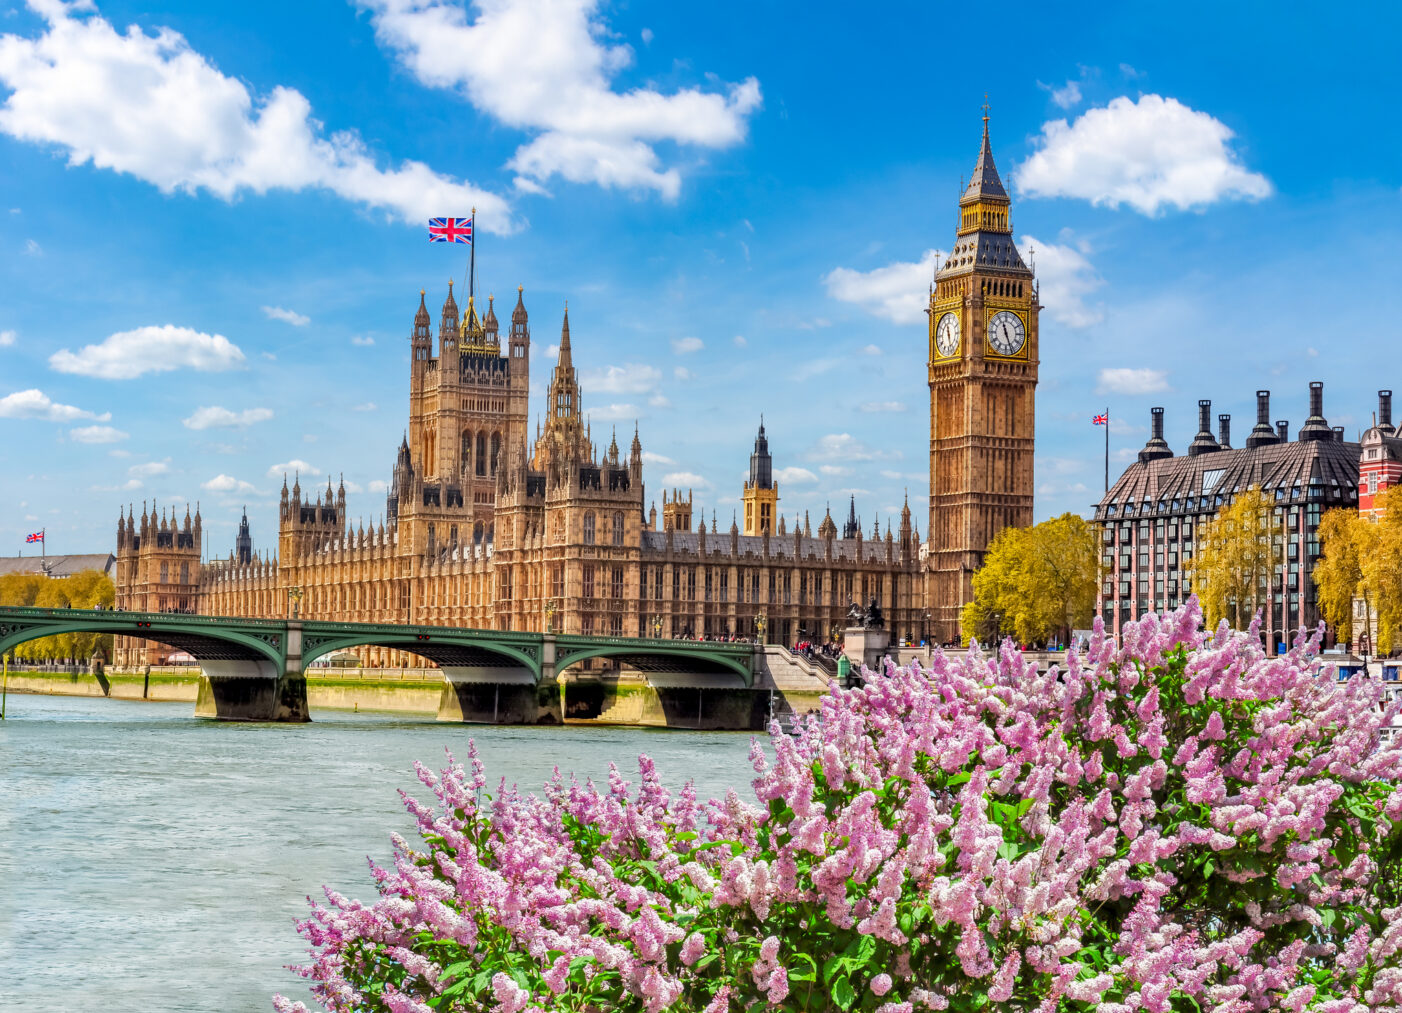 Scenic view of London, England featuring historic architecture and Big Ben under a blue sky